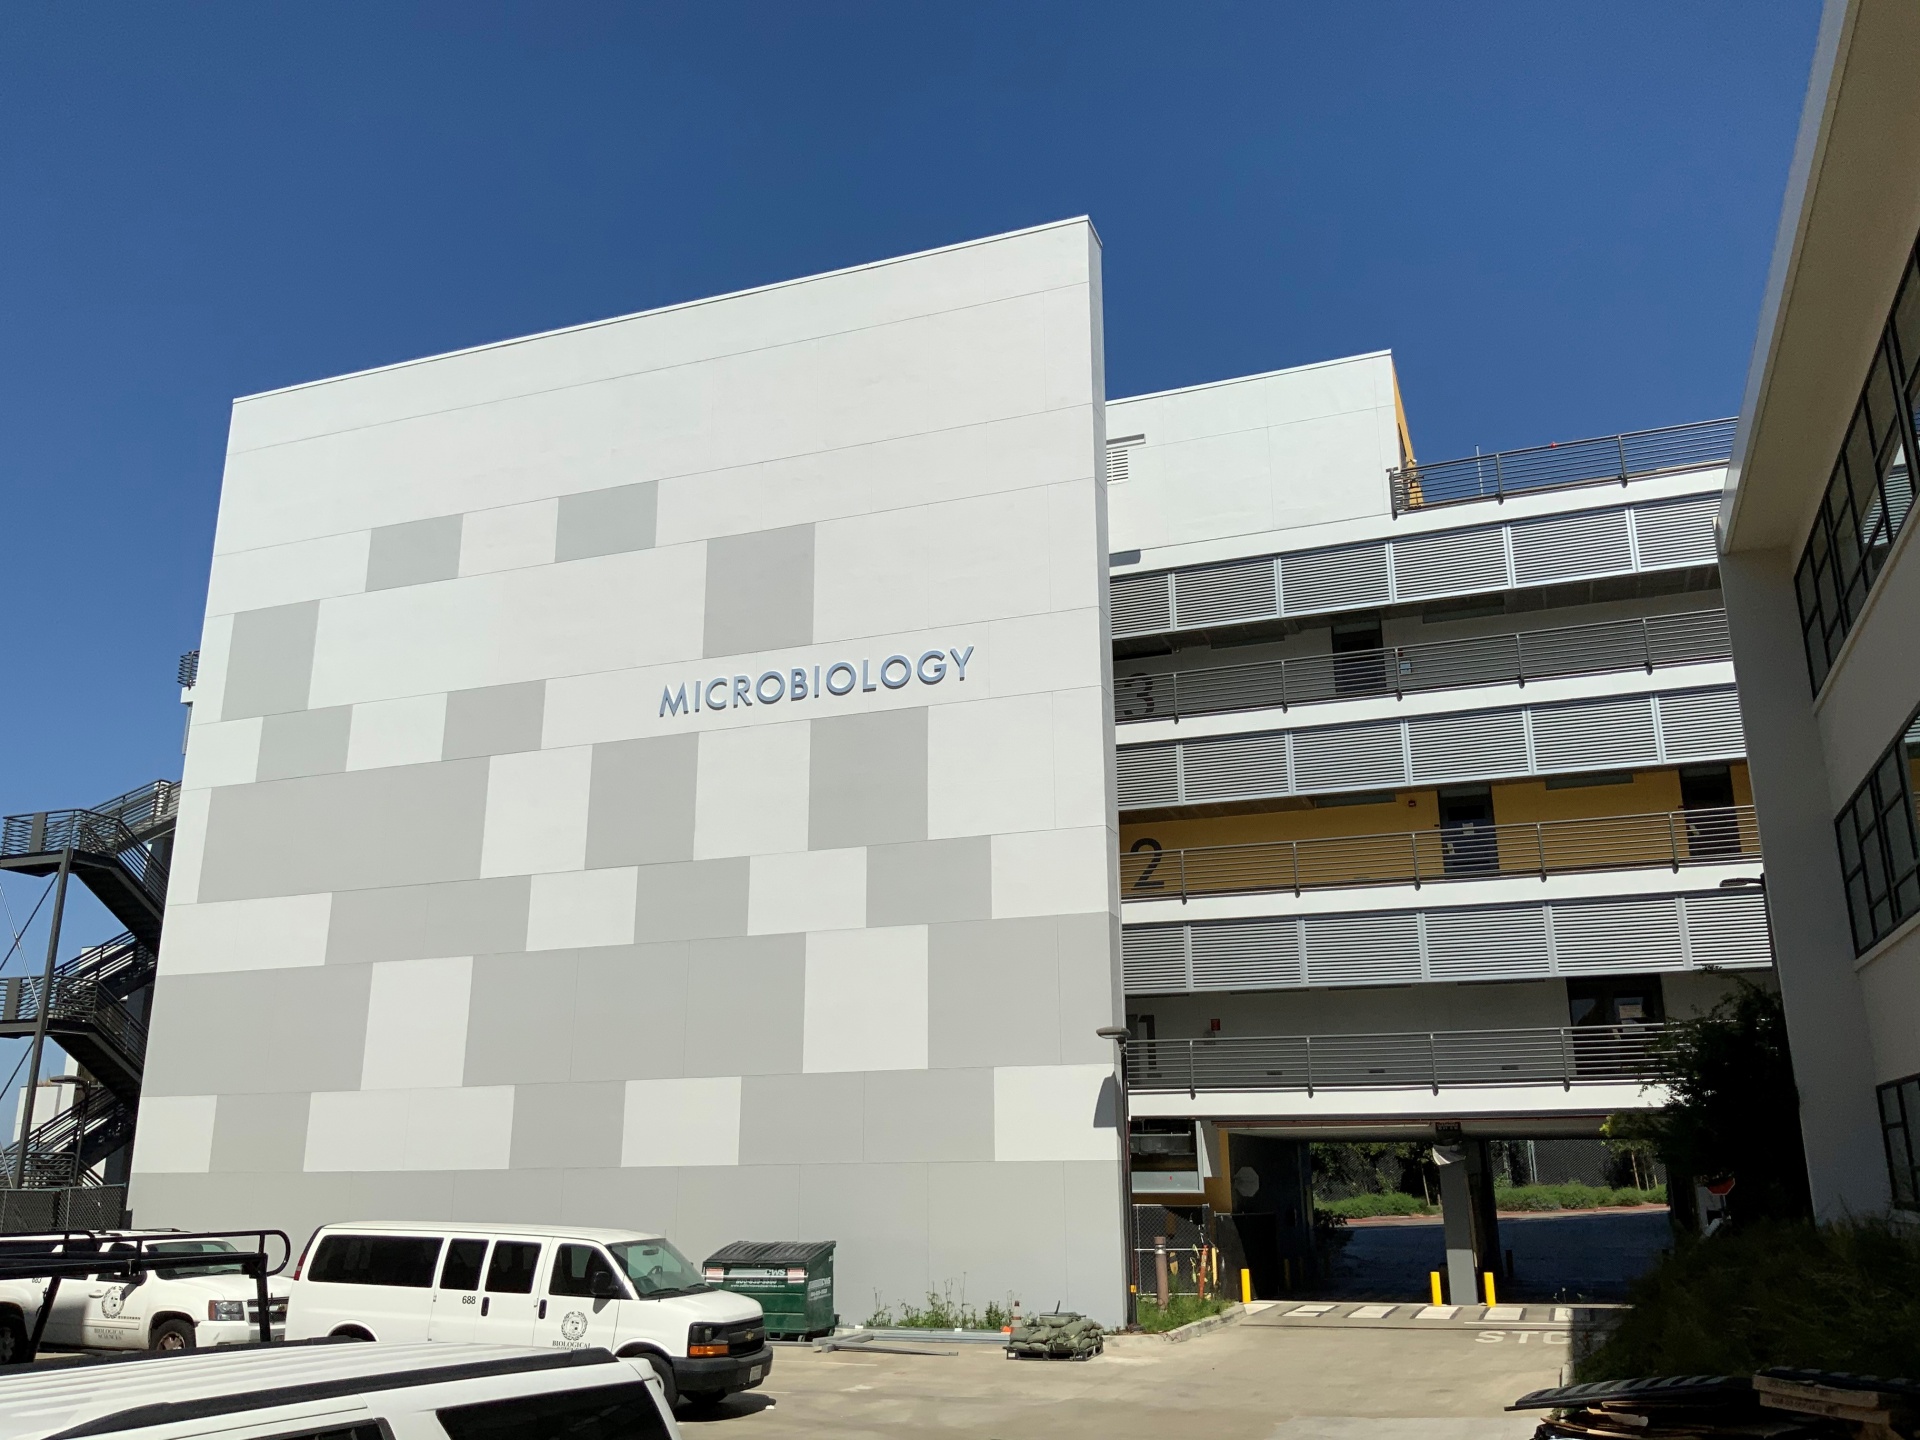 Microbiology Building